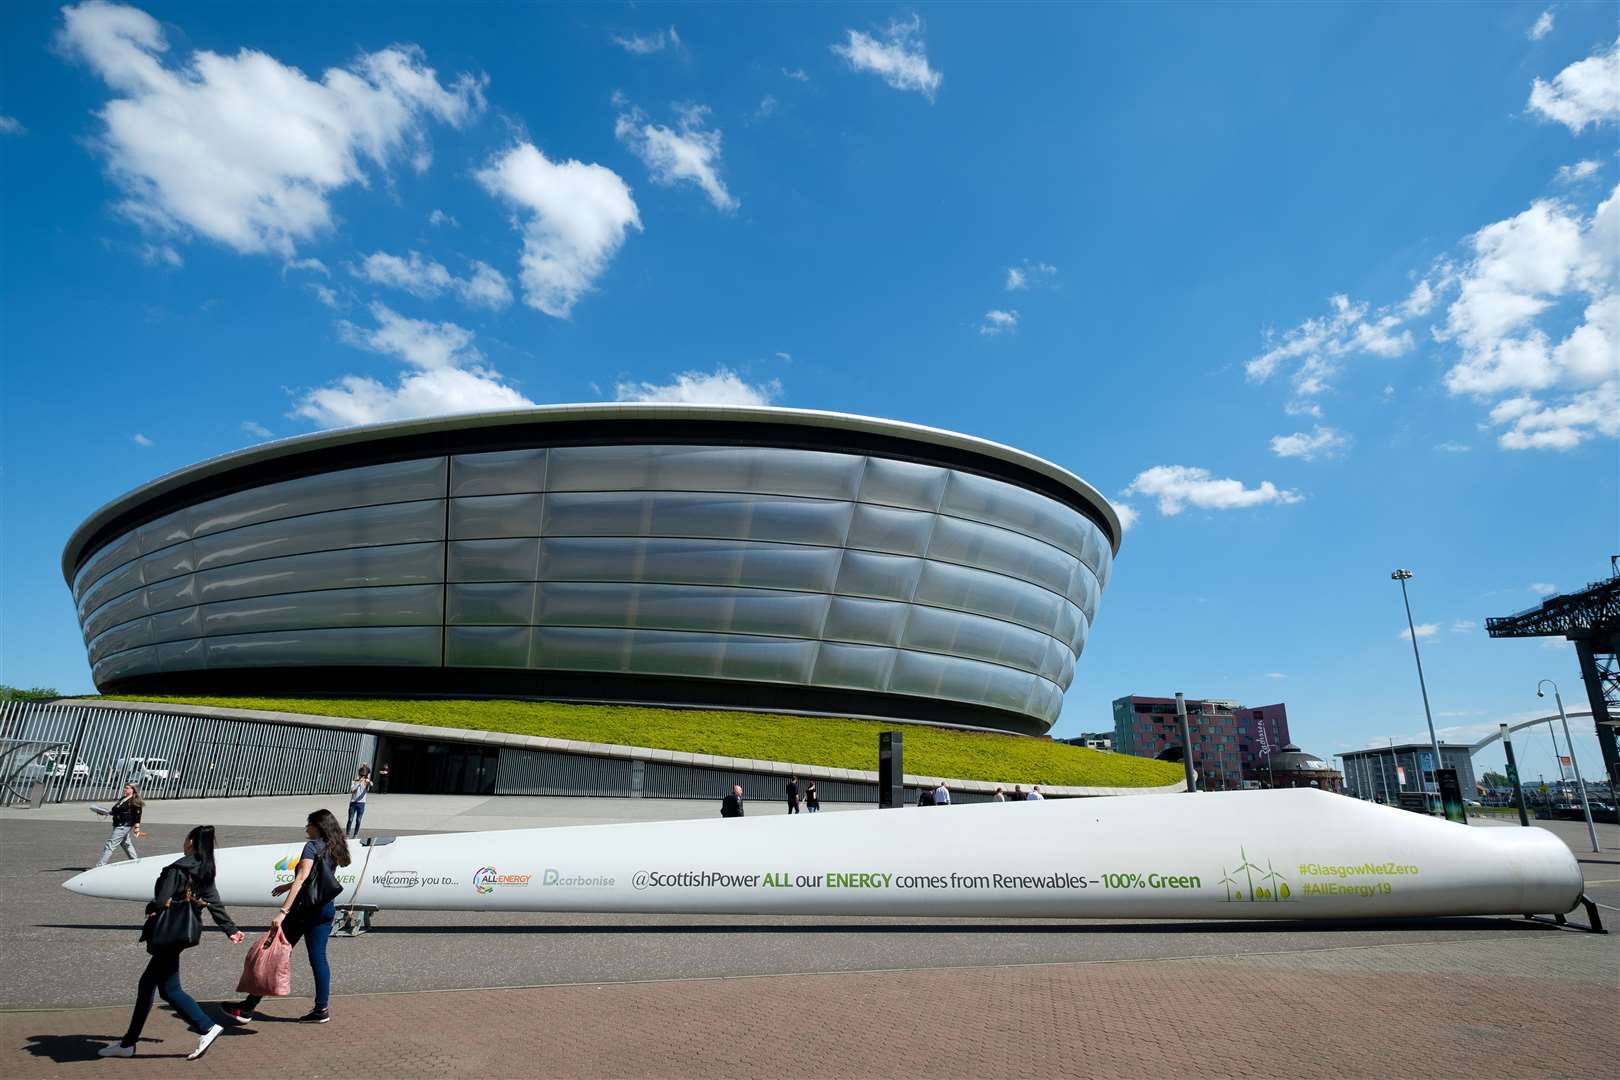 All-Energy returns to Glasgow's SEC in 2020.